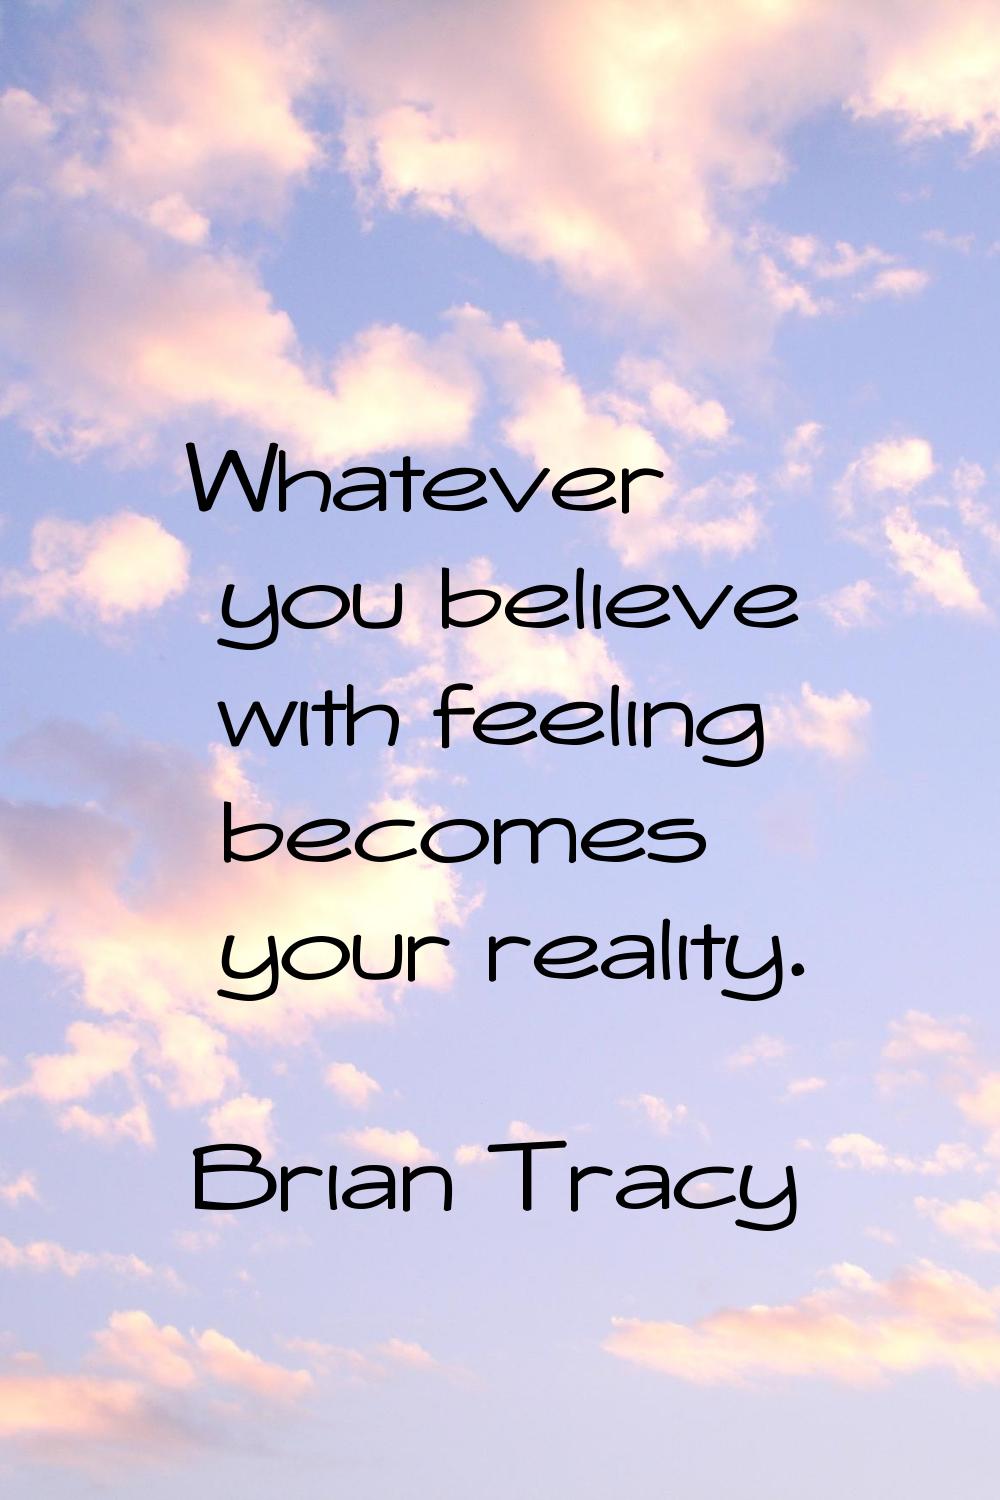 Whatever you believe with feeling becomes your reality.